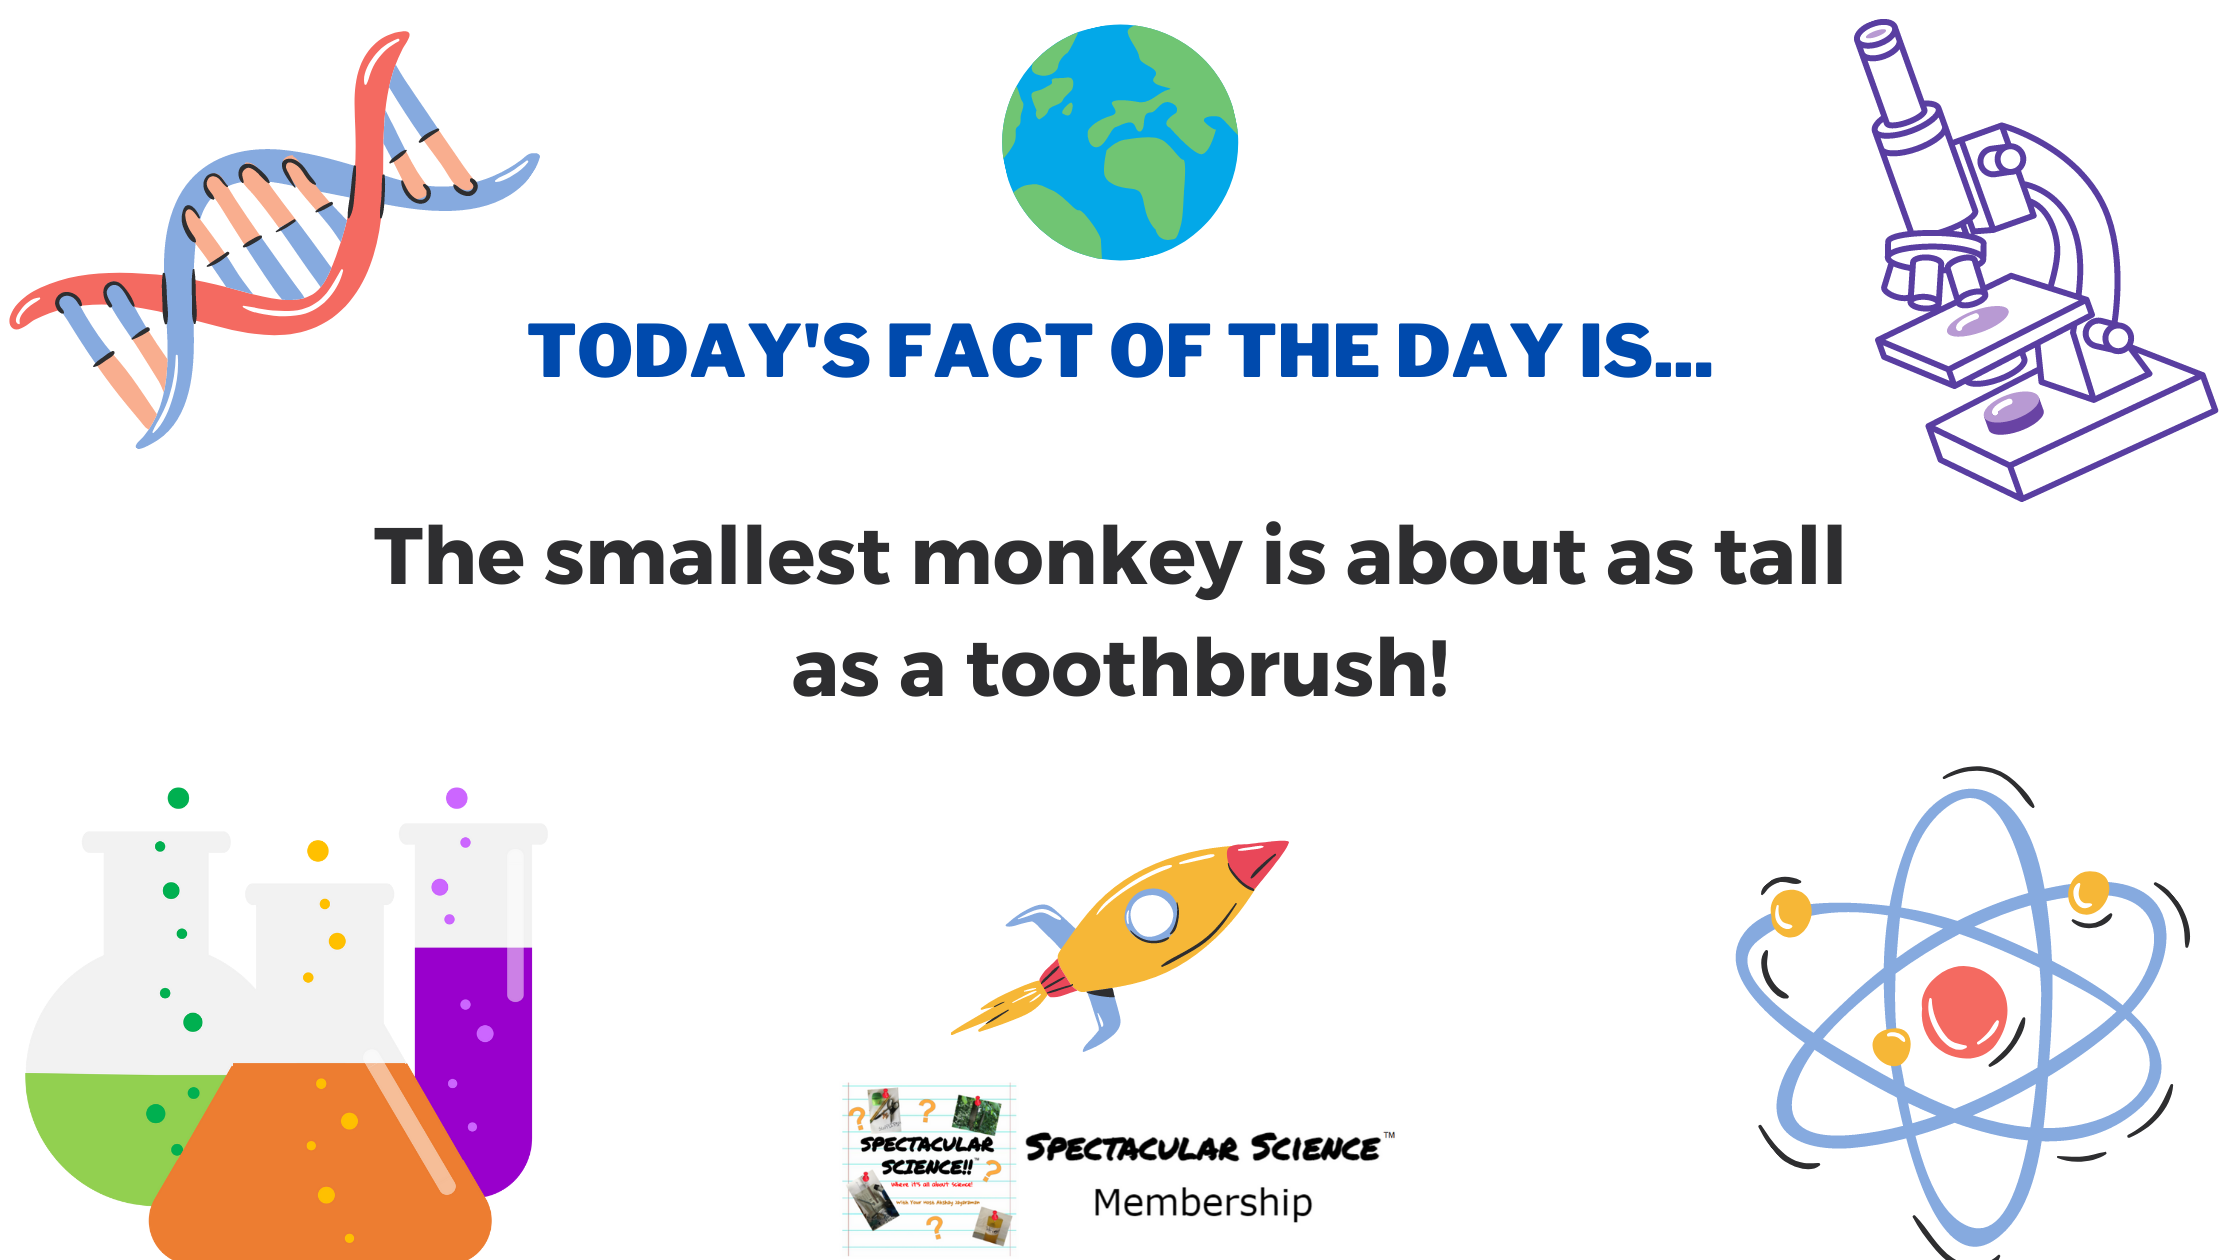 Fact of the Day Image Mar. 23rd